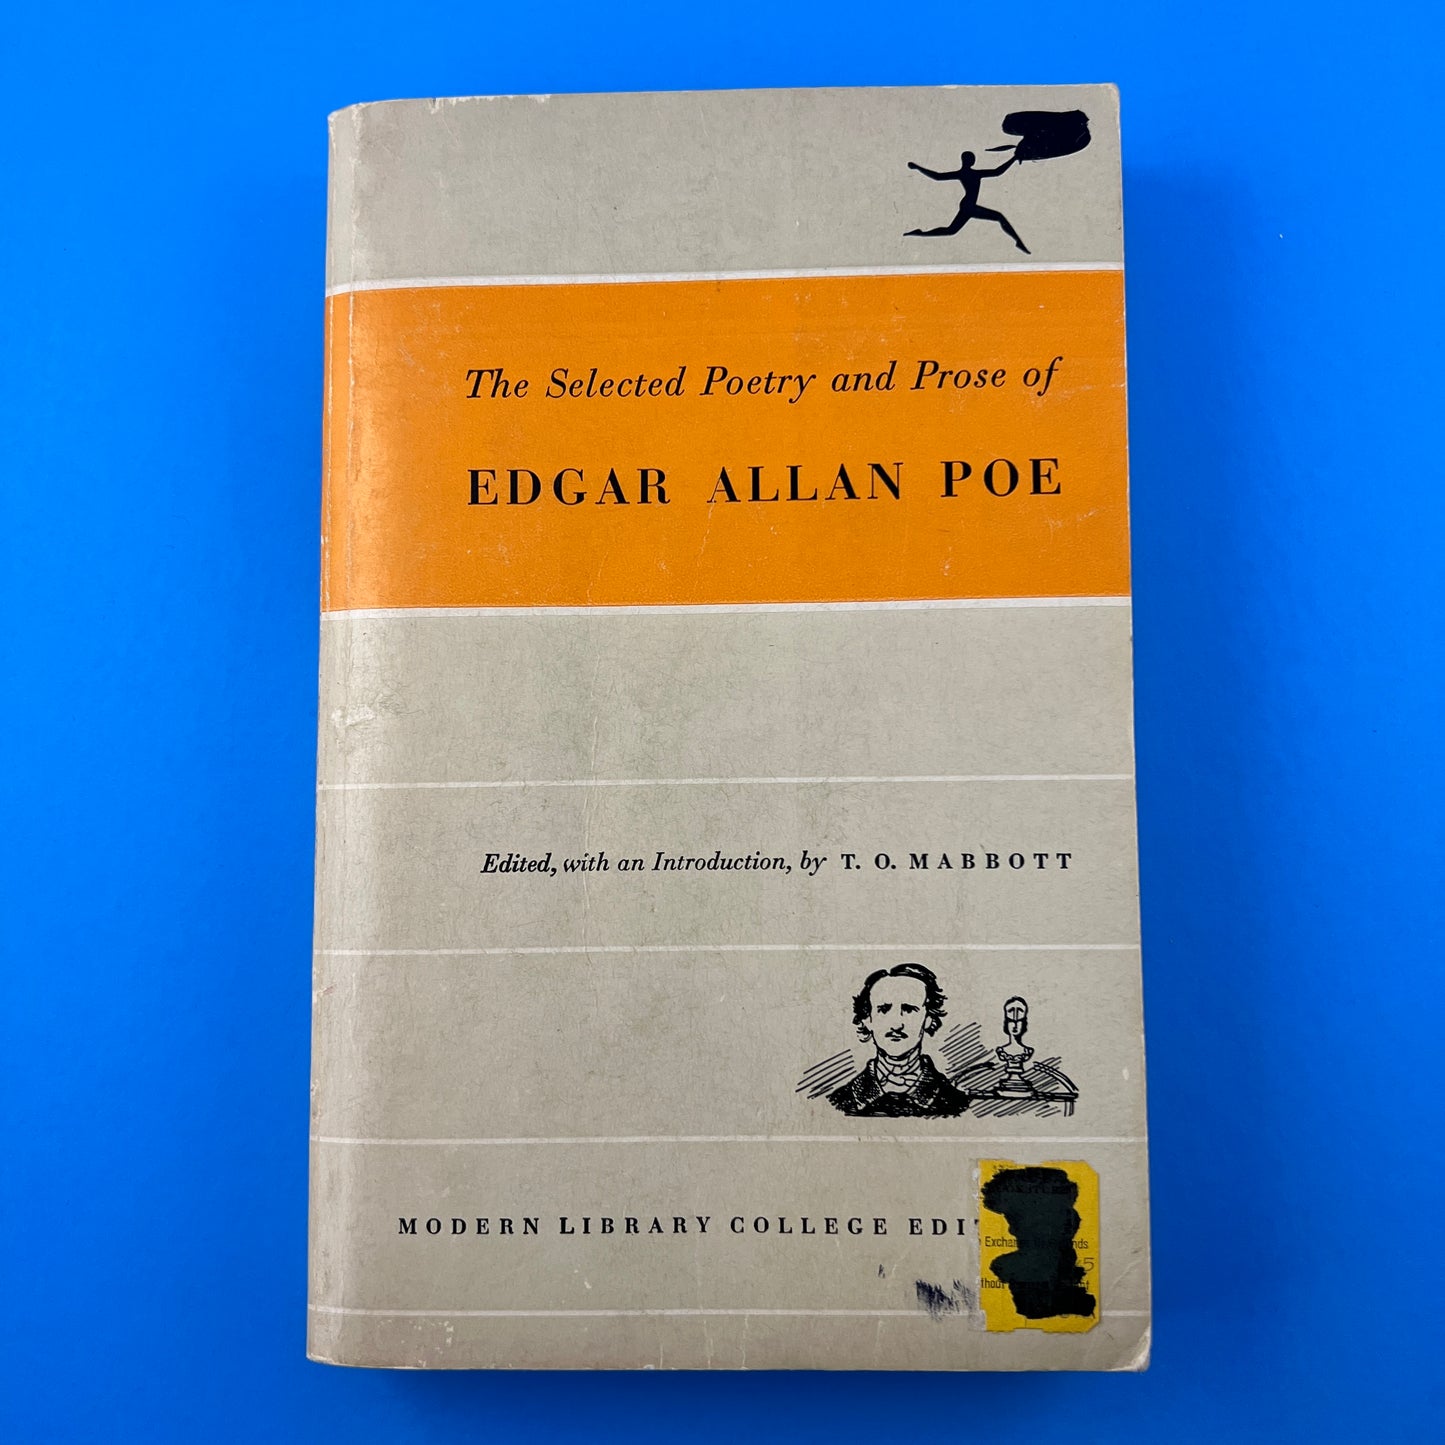 Poe's Selected Poetry and Prose